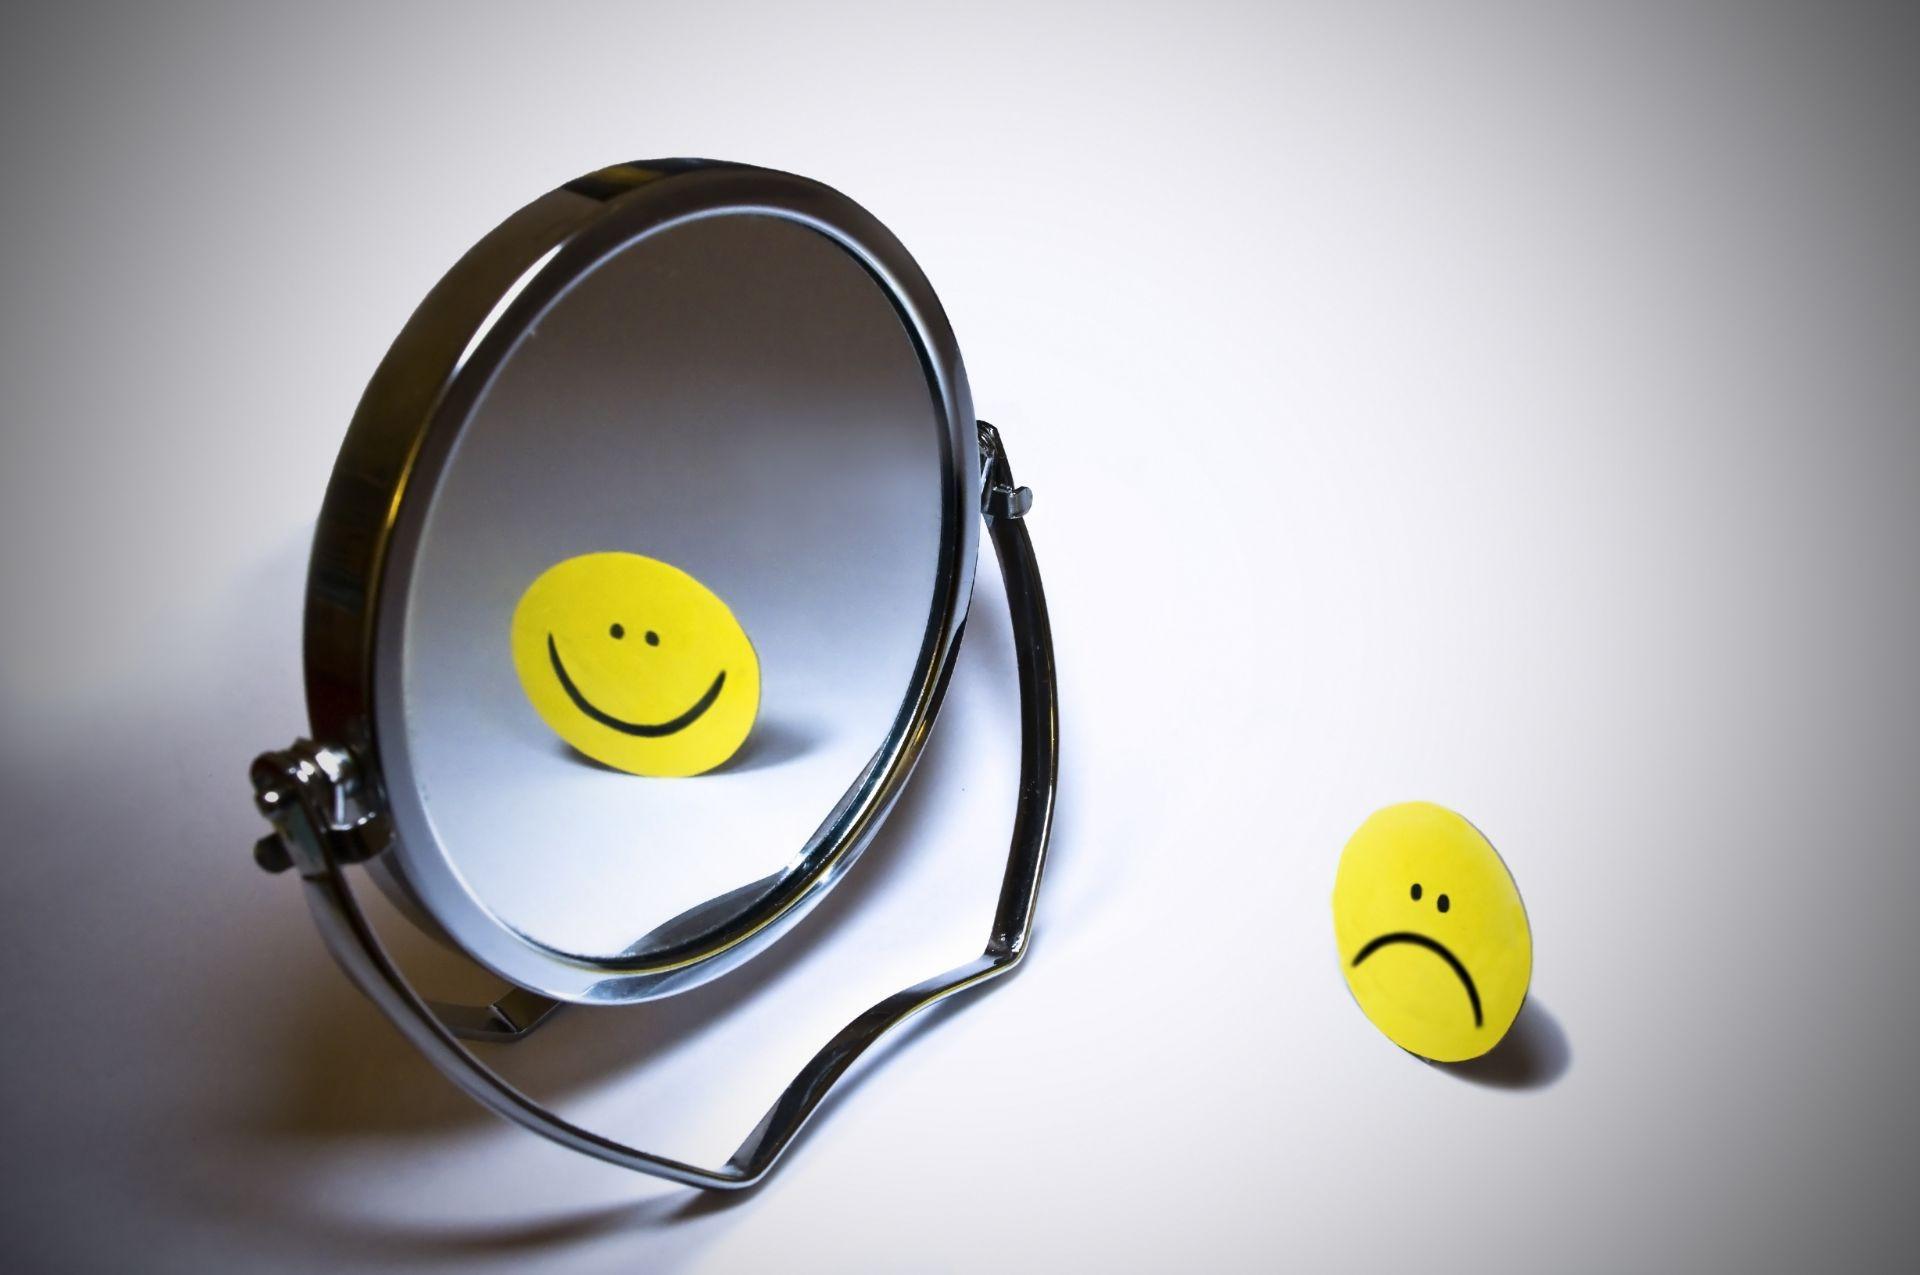 Emoticon smile the mirror. Android wallpaper for free